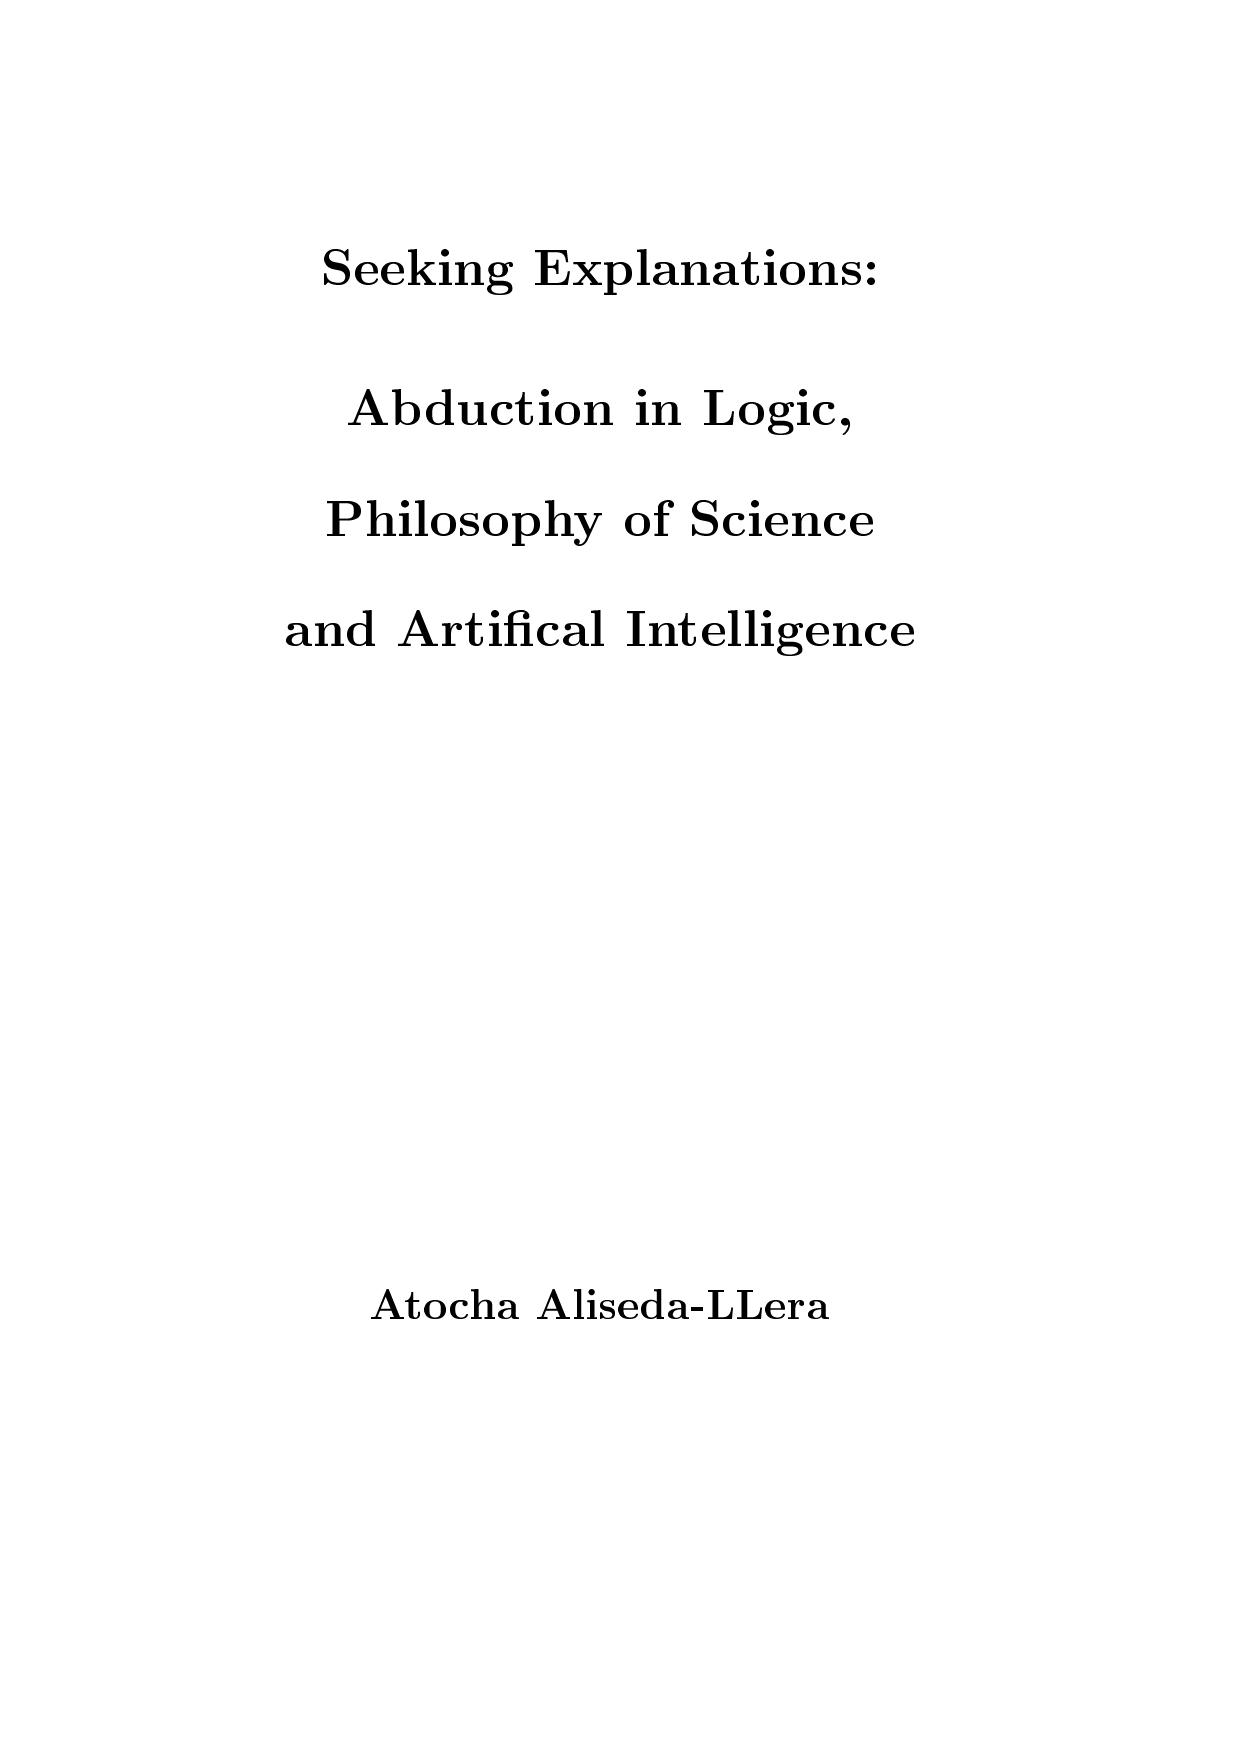 Seeking Explanations - Abduction in Logic, Philosophy of Science, and Artifical Intelligence